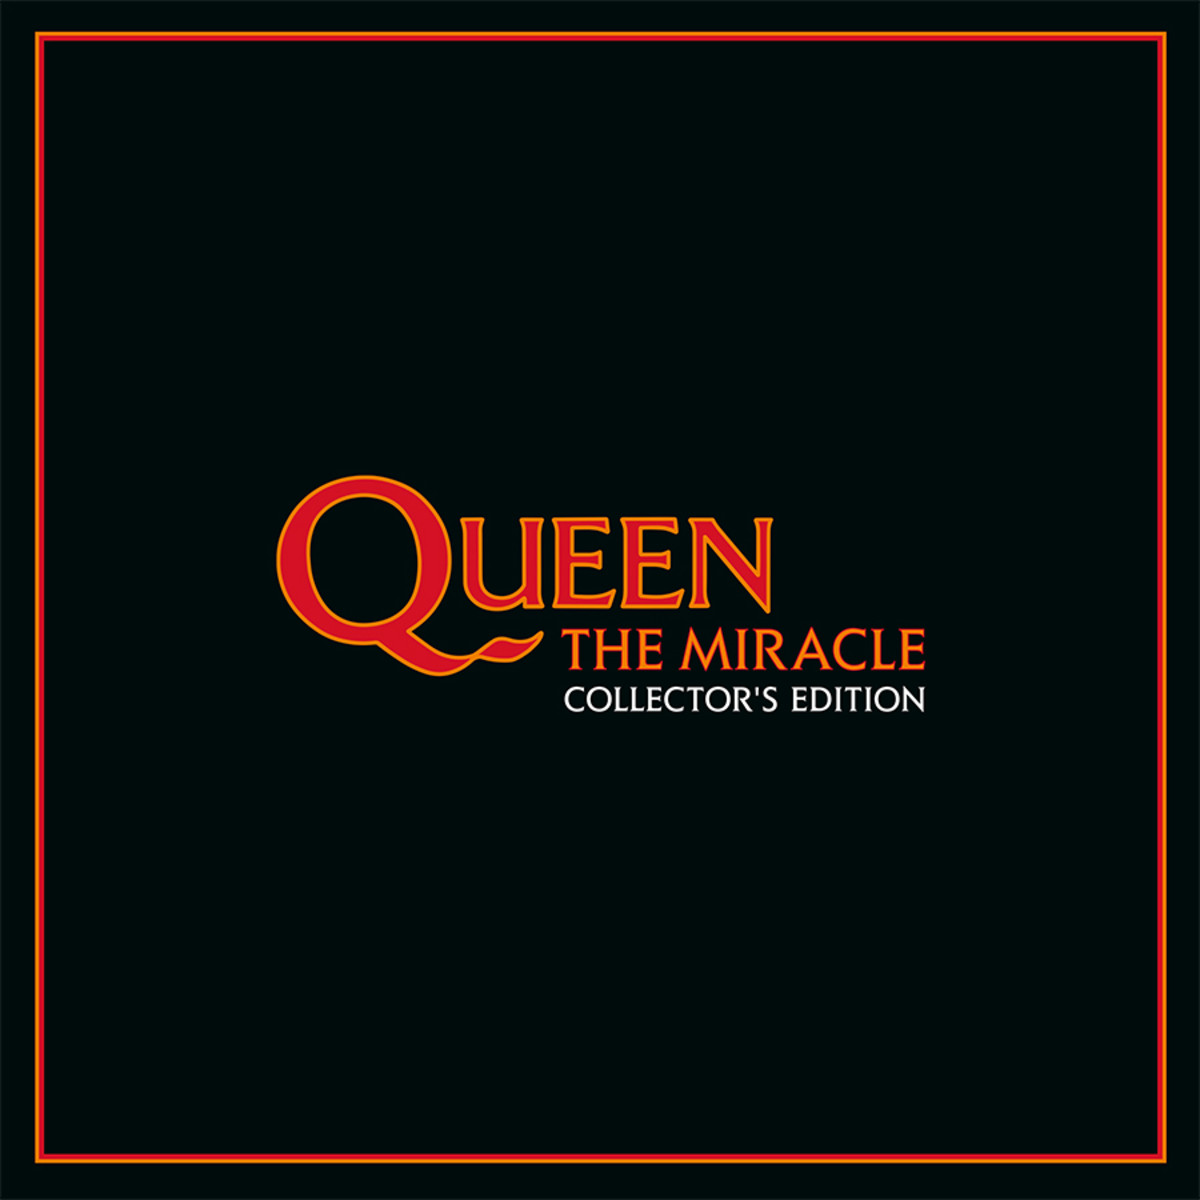 Queen - The Miracle Collector's Edition - Box Set Cover Art